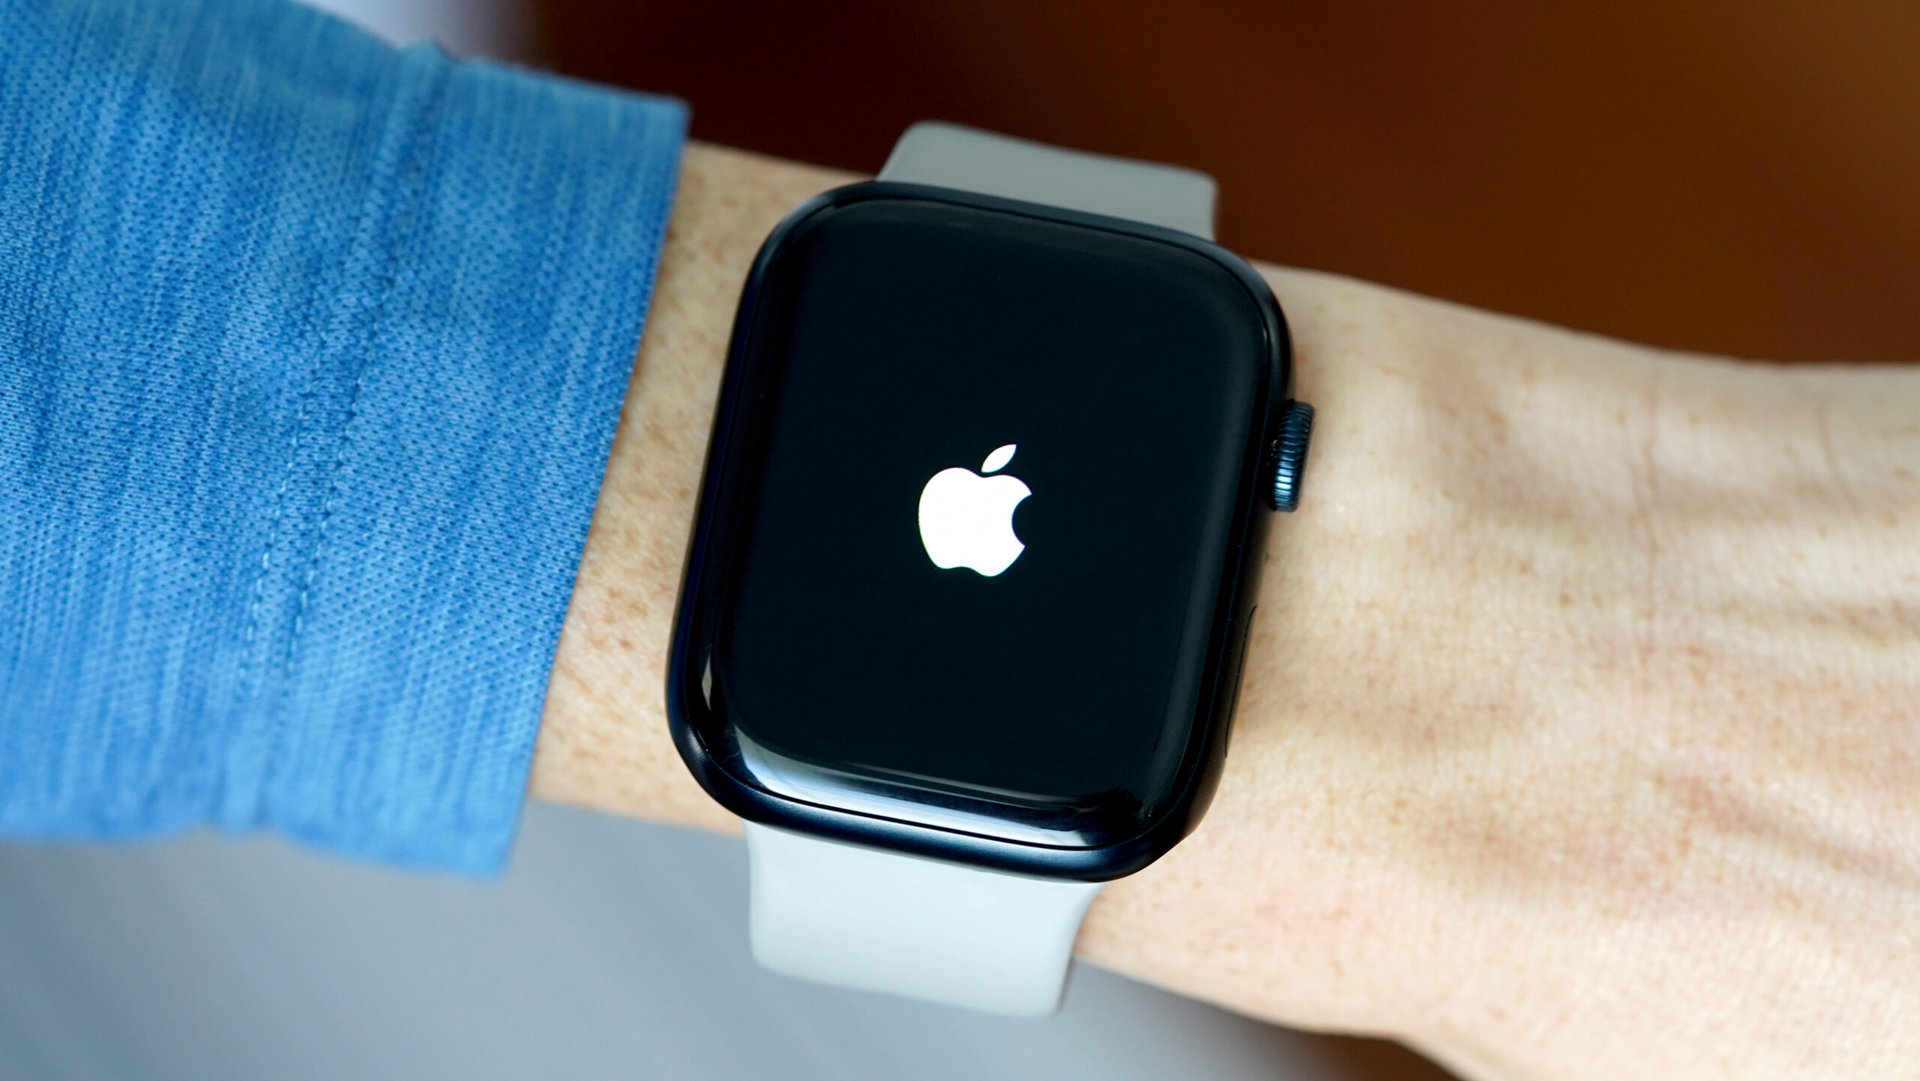 A new generation of Apple Watch is always the best upcoming smartwatch for Apple loyalists.